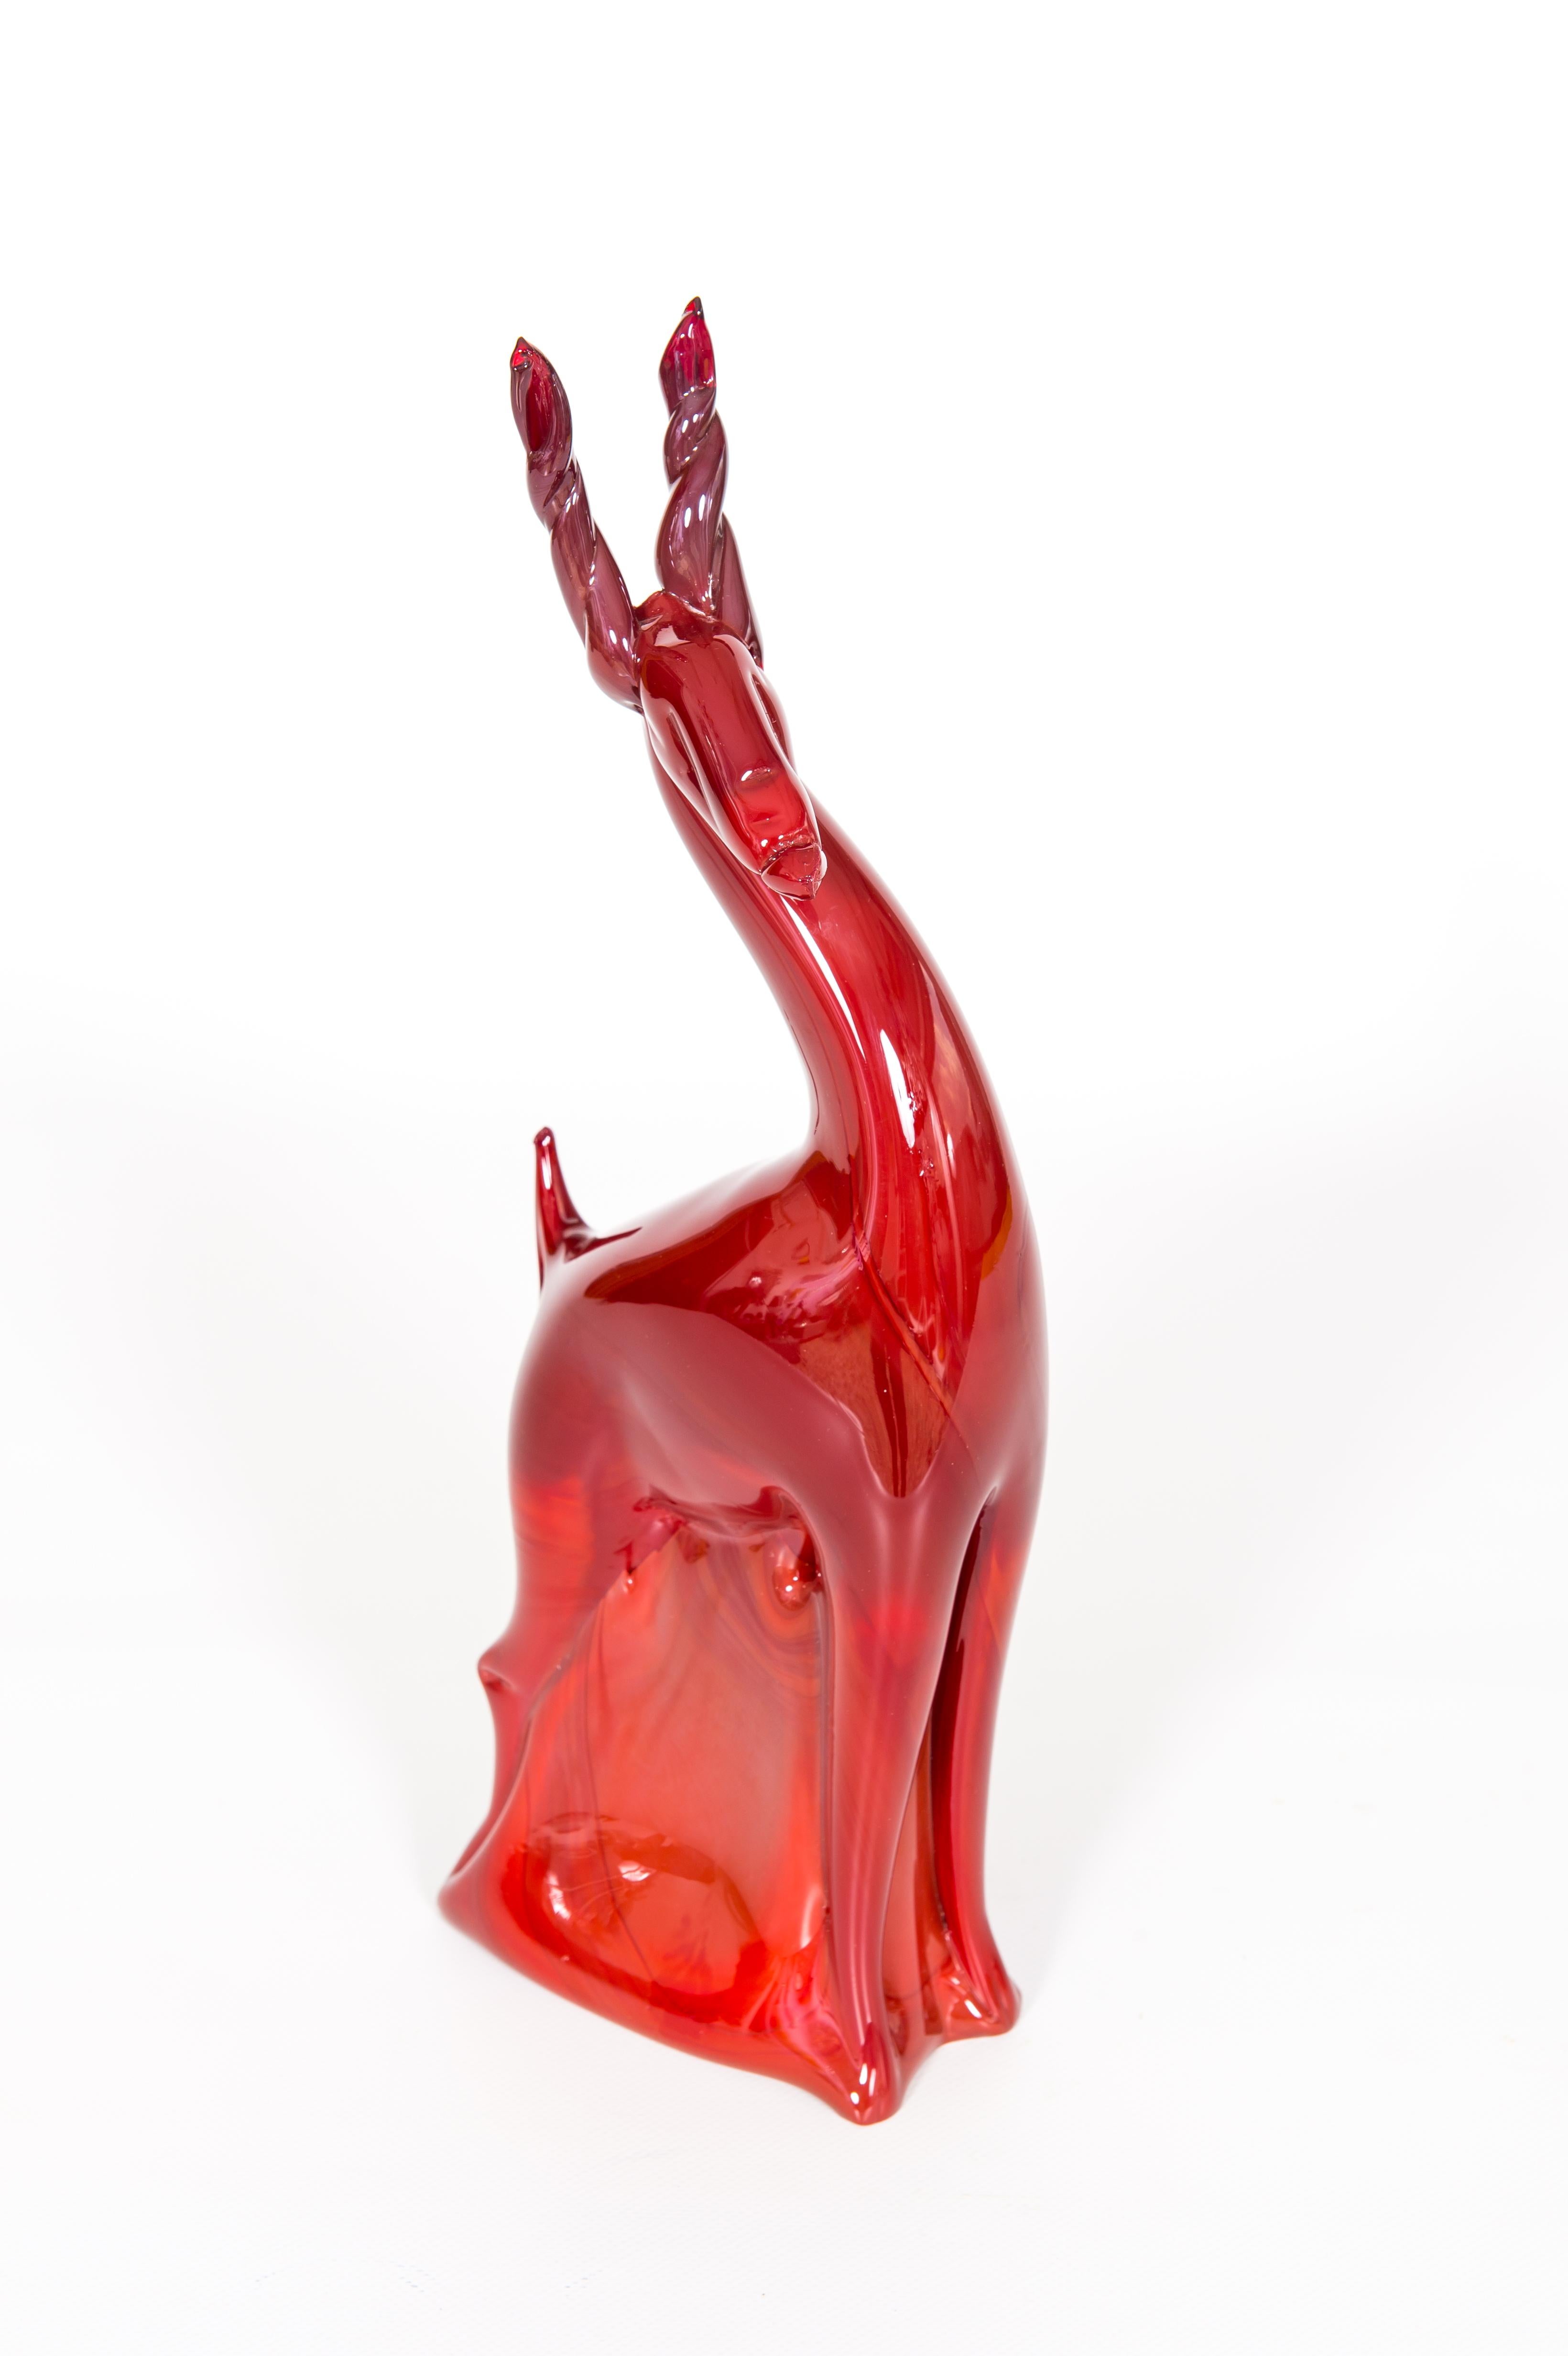 Standing Ruby Red Deer in Blown Murano Glass with Red Shades Venice Italy 1990s.
Completely handmade in the 1990s in Murano, the Venetian island renowned for its centuries-old tradition of glassmaking, this sculpture depicting a standing deer seems